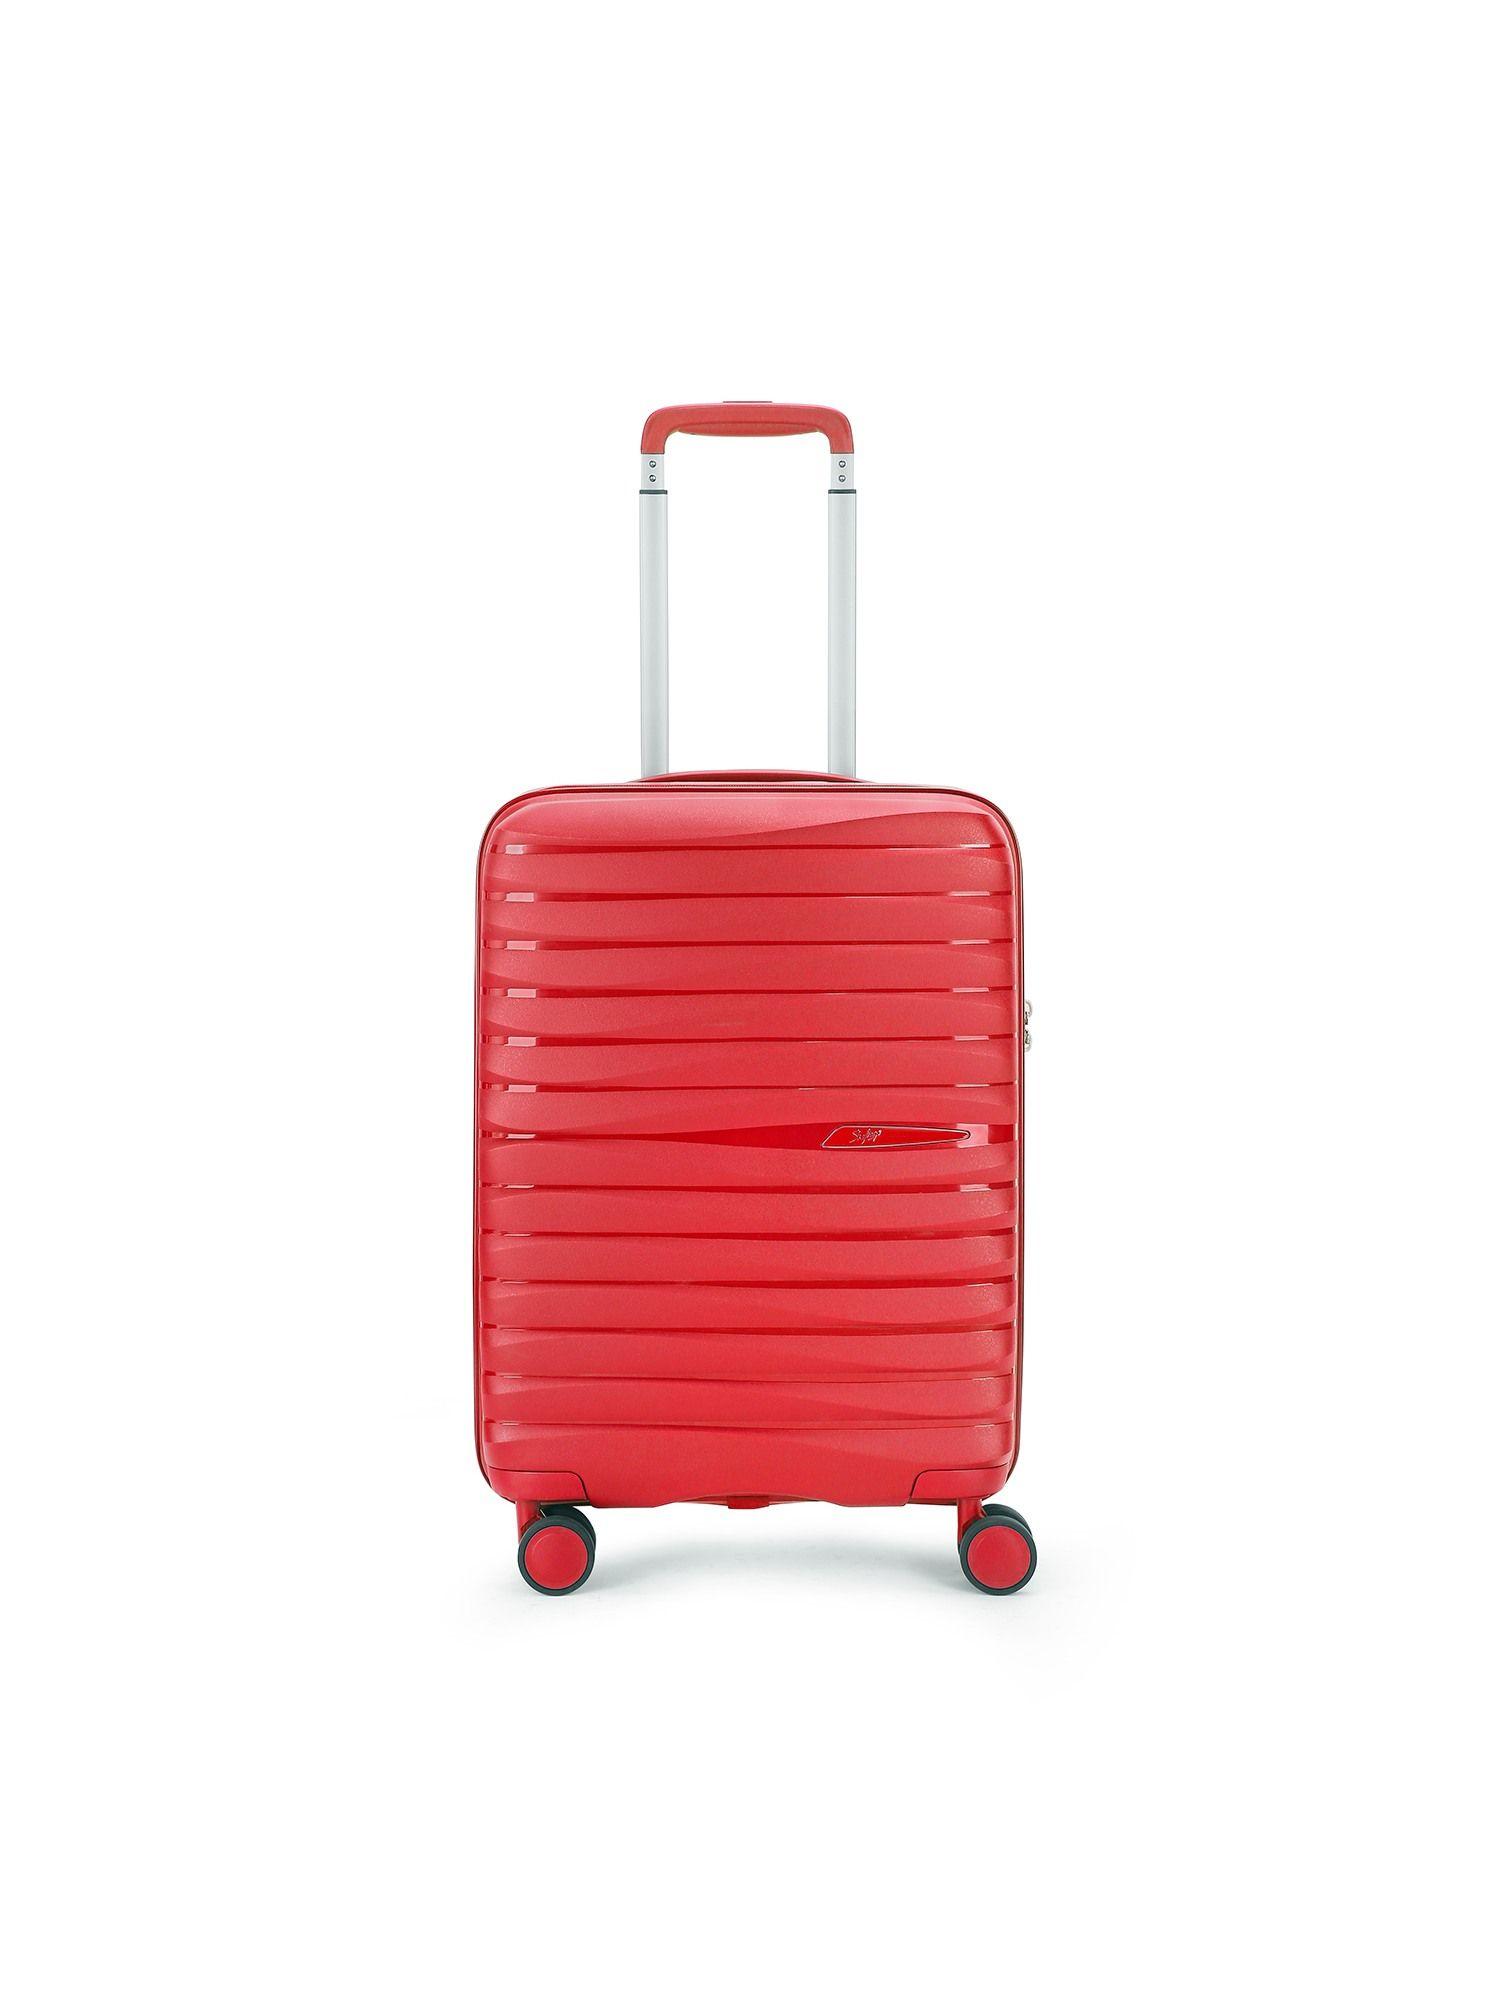 flot red hard luggage 8-wheel suitcase cabin trolley bags